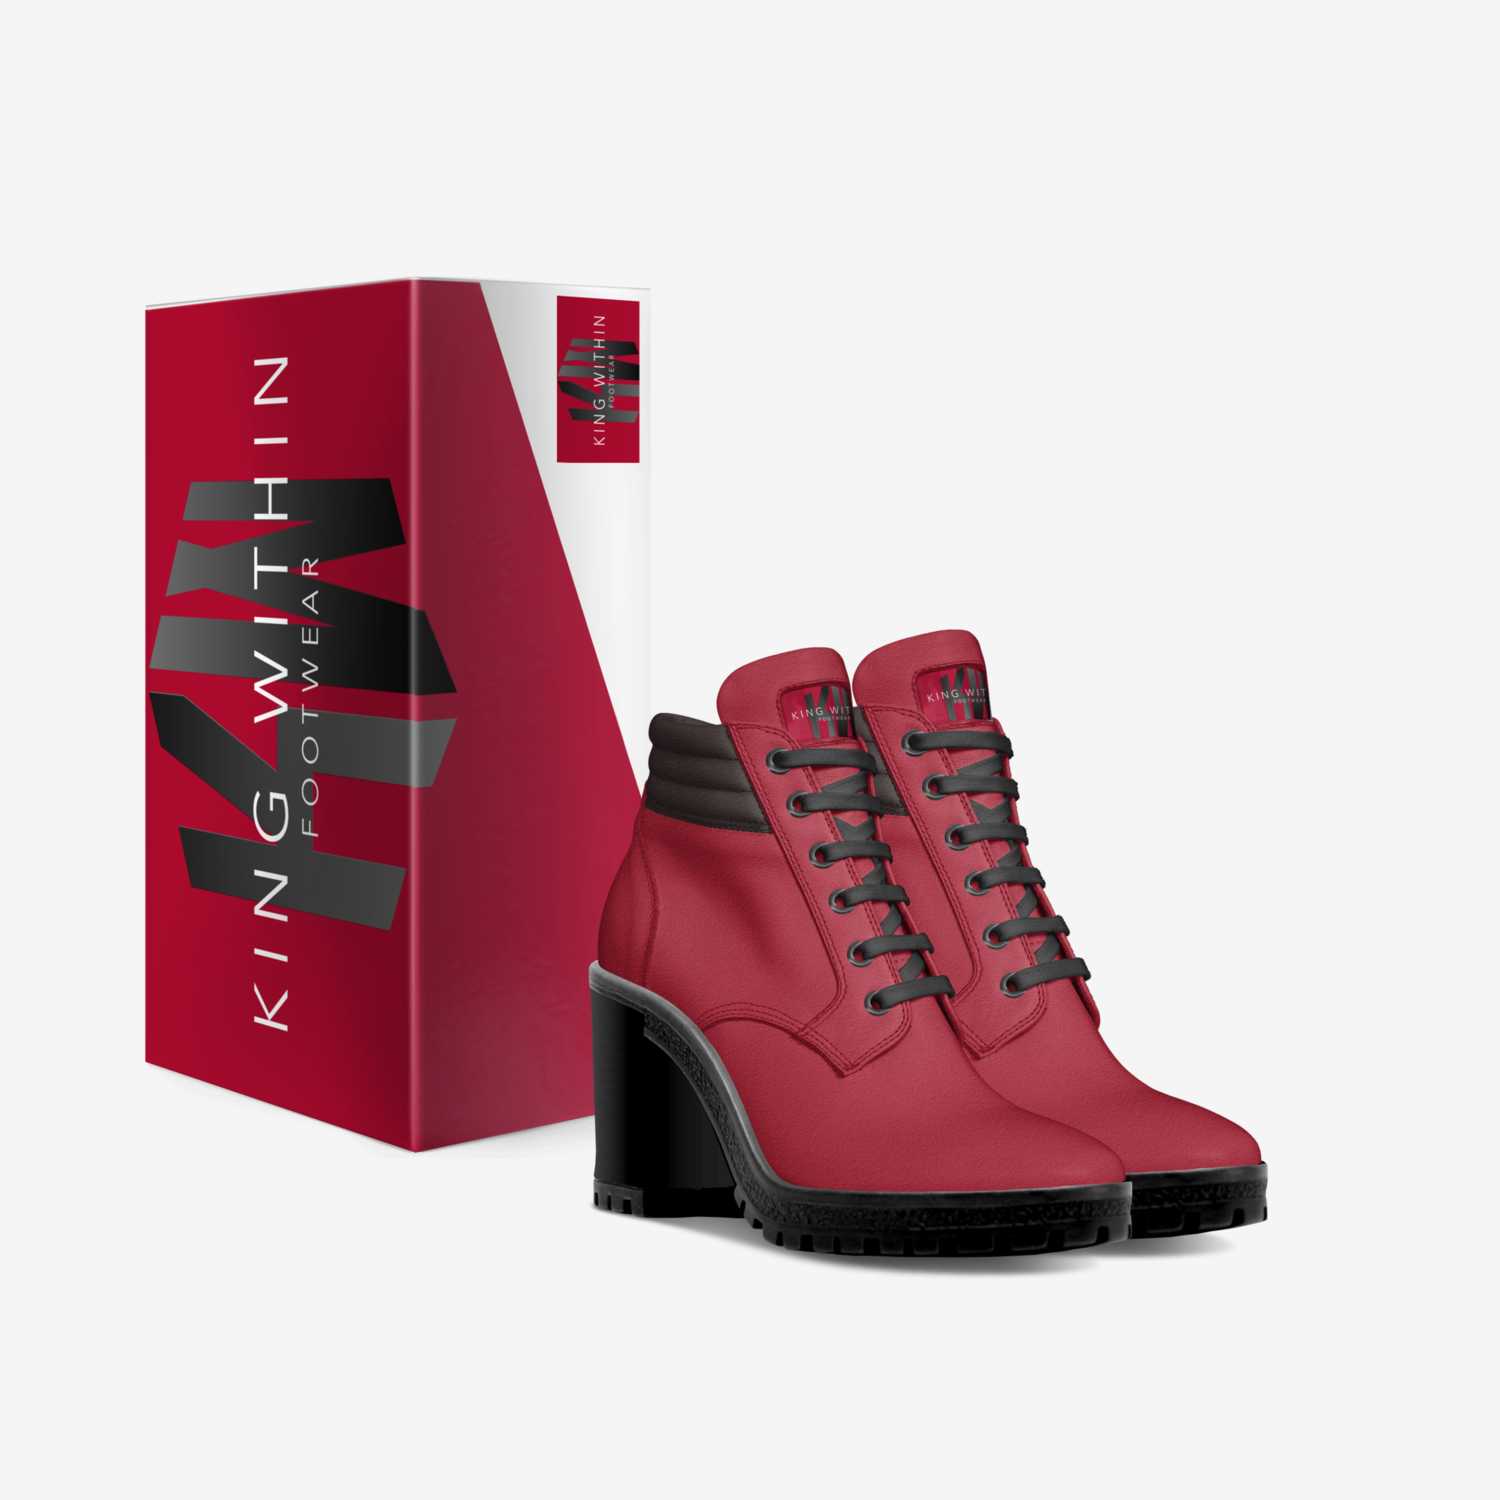 K.W Footwear custom made in Italy shoes by Celso N | Box view